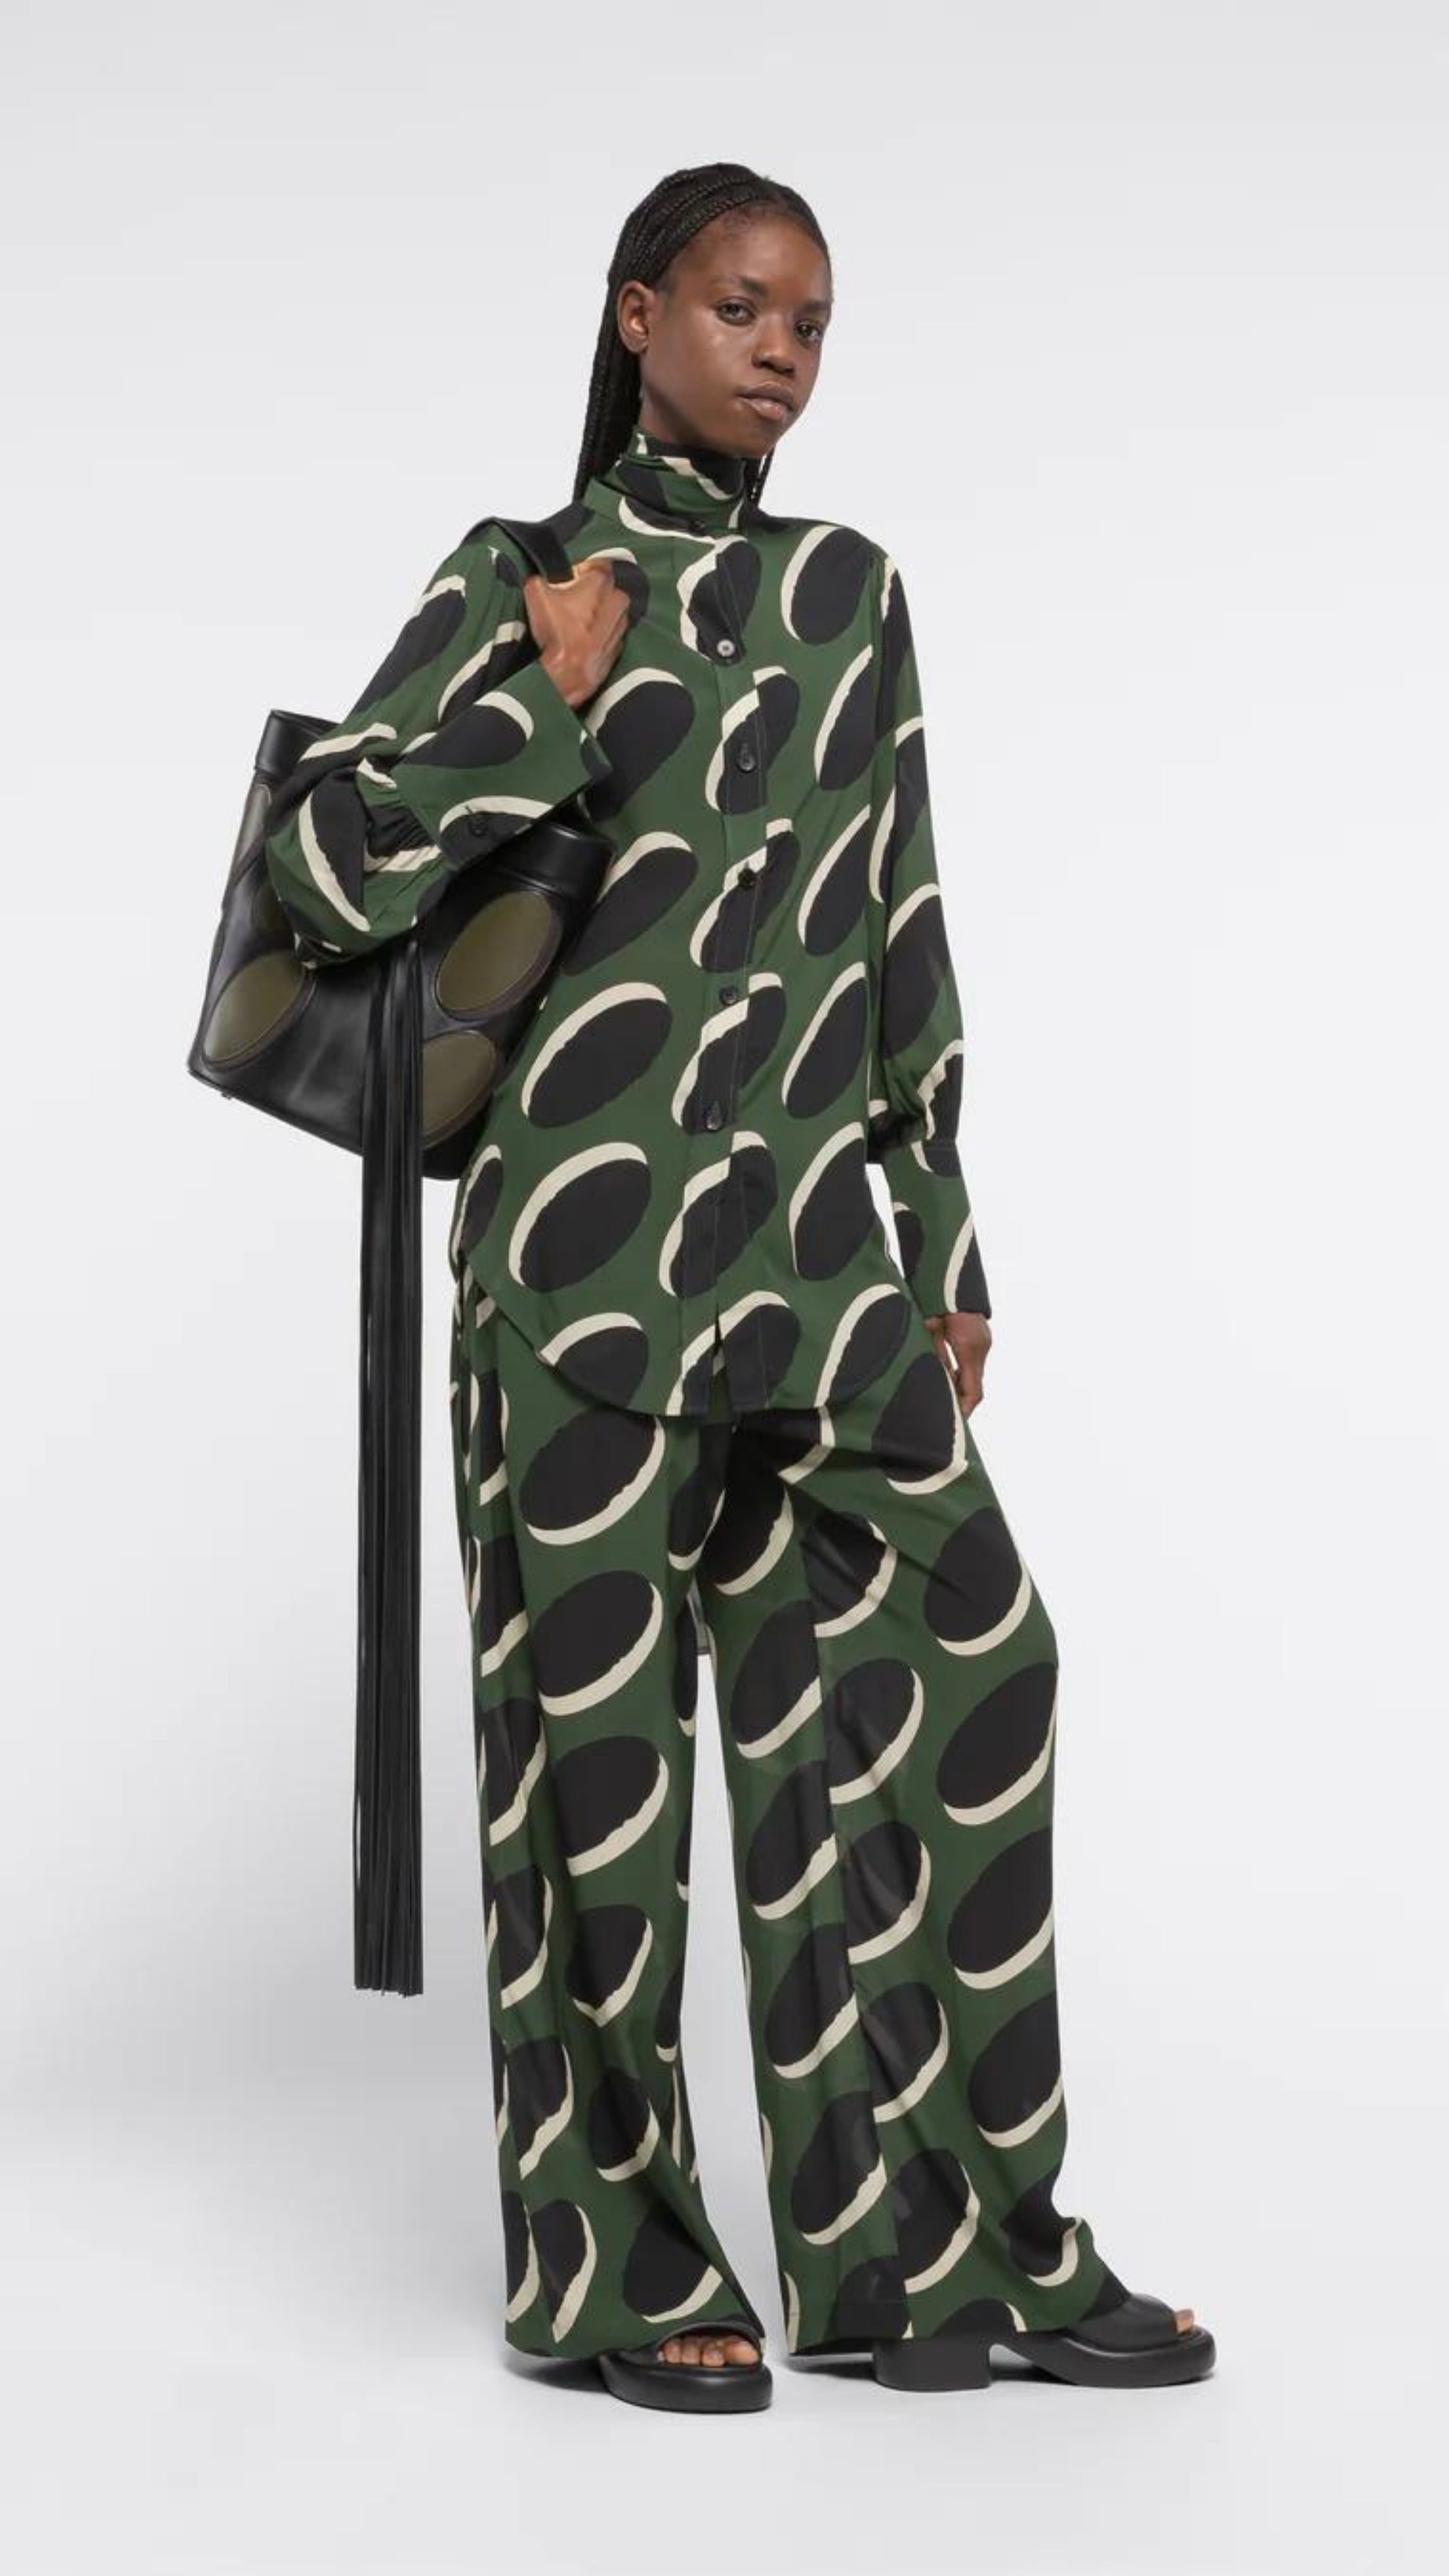 AZ Factory Colville Molly Molloy Lucinda Chambers, Pajama Pants in Khaki Macaroon Pajama loose style silky pants with elastic and drawstring waist band. Crafted in olive green with black and ecru oval pattern. Shown on model facing front.